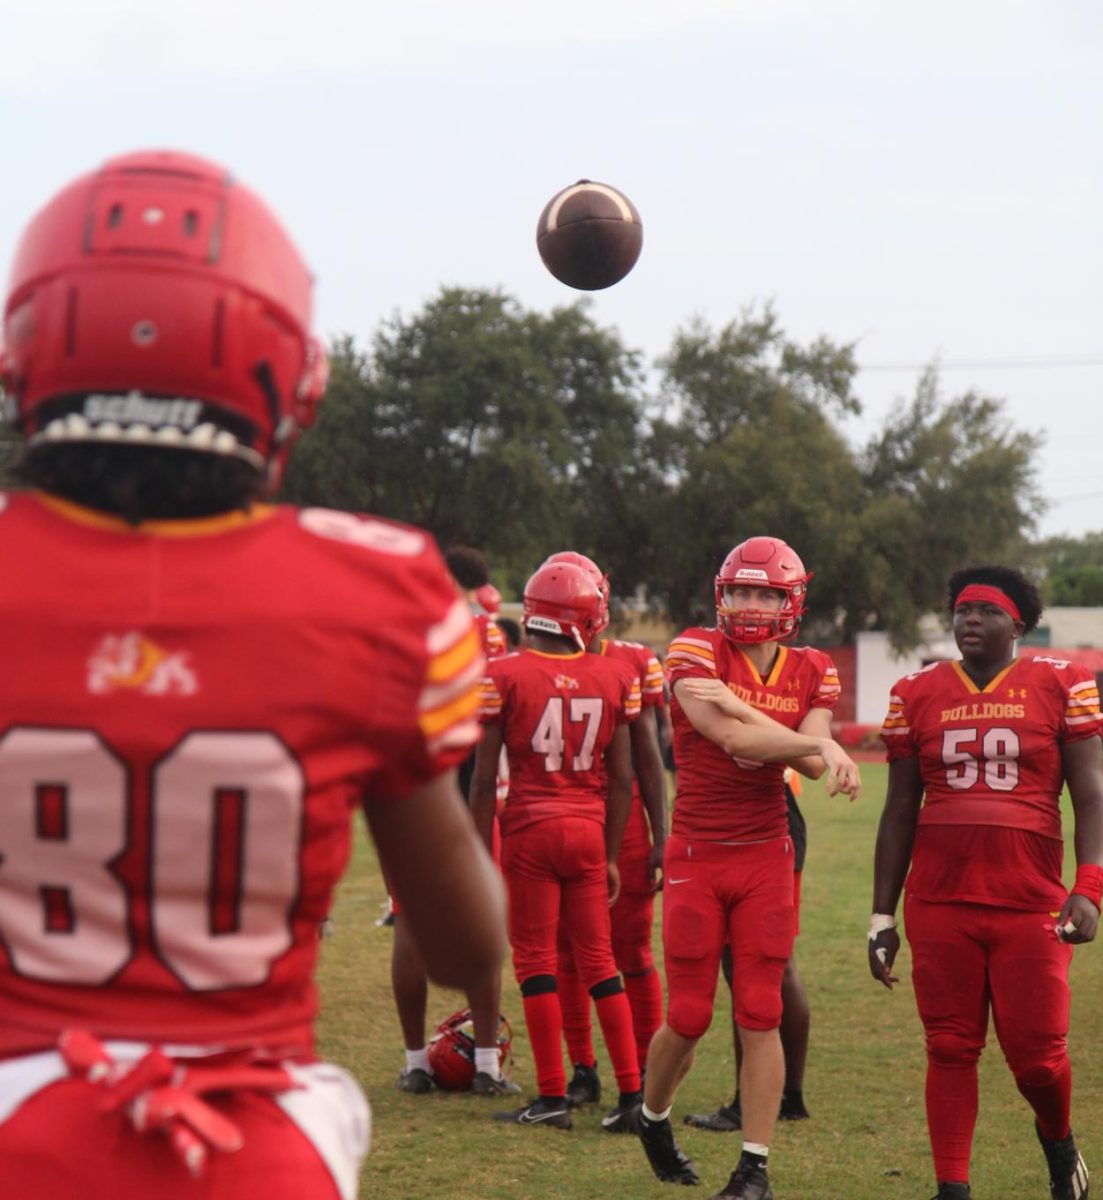 Members of the Bulldogs Varsity football team warm up on the sidelines before a home game. 